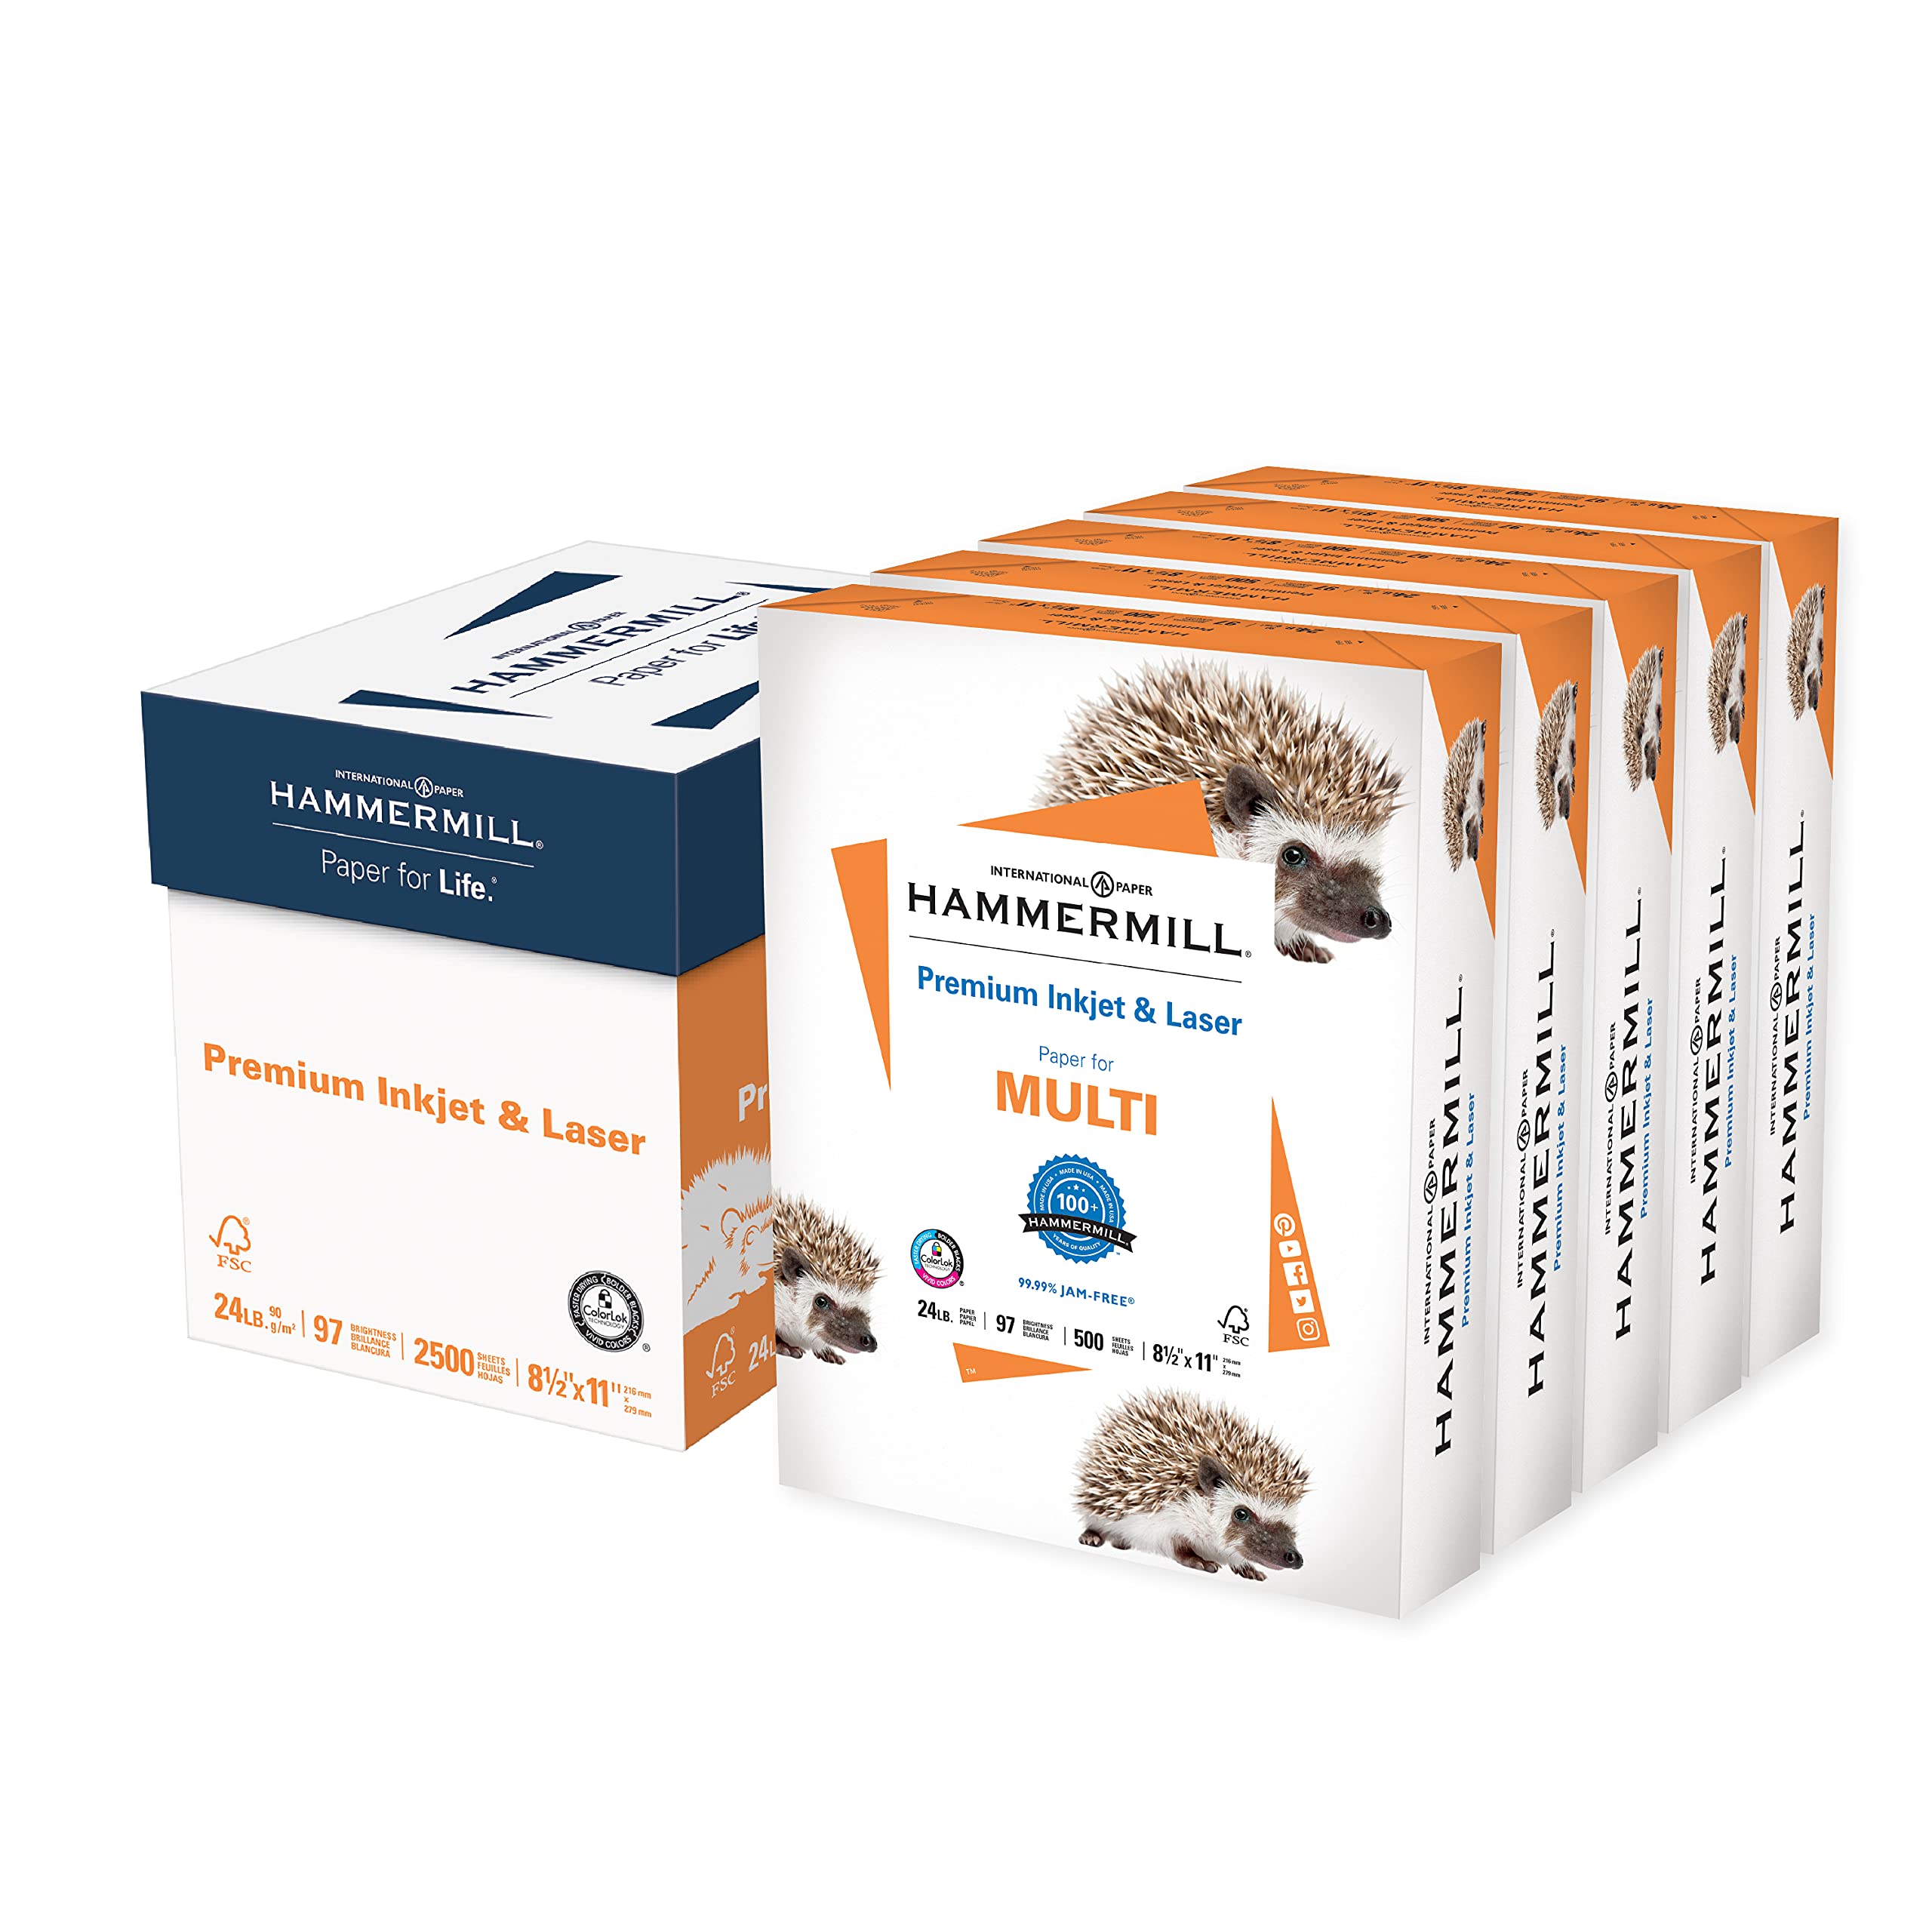 Hammermill Premium Inkjet & Laser Paper, Made in USA, Sustainably Sourced From American Family Tree Farms,